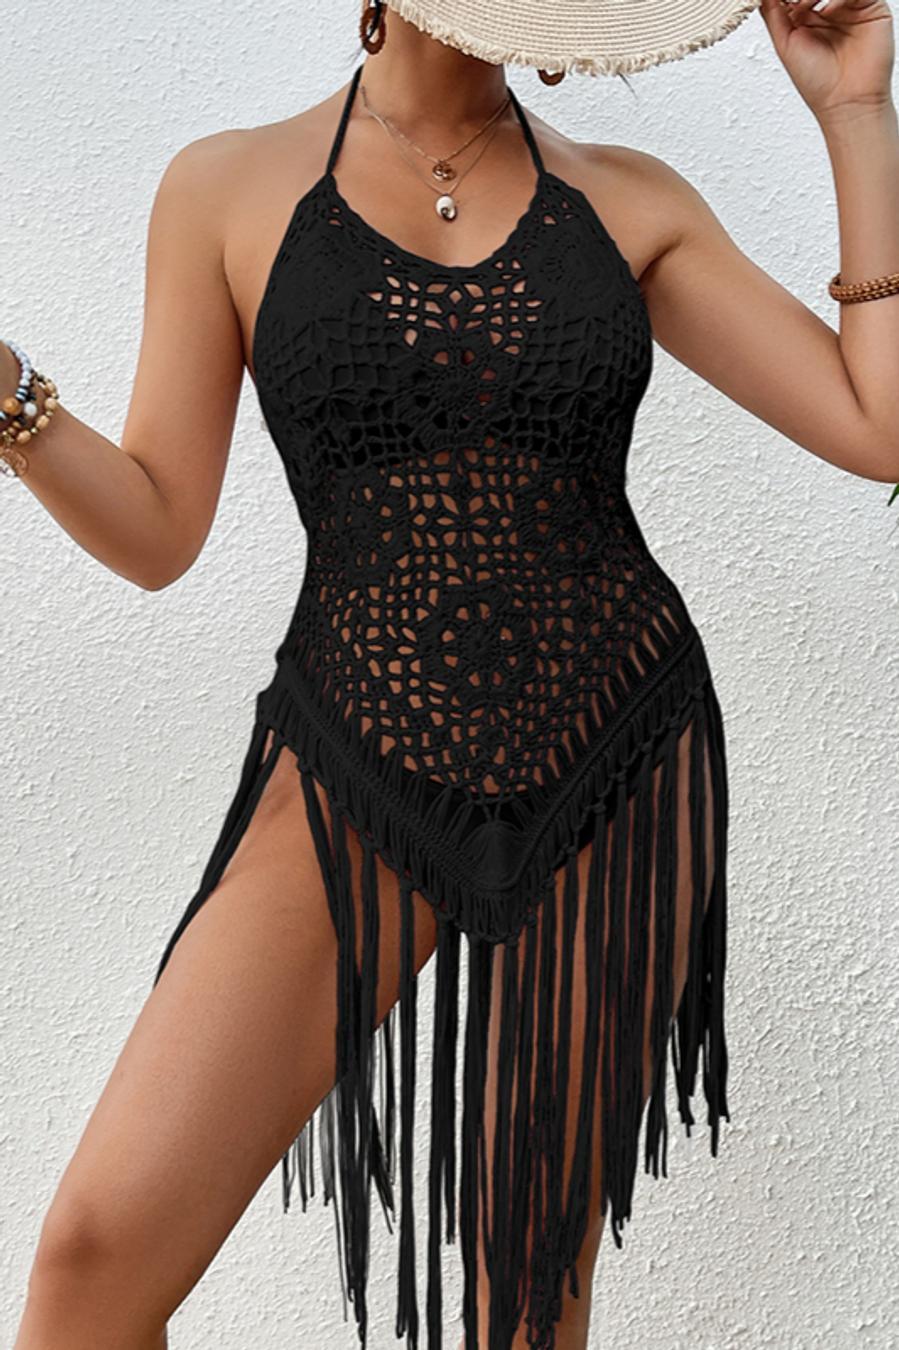 Halter Style Crochet Coverup  With Cut-Outs and Tassels   (5 Colors)